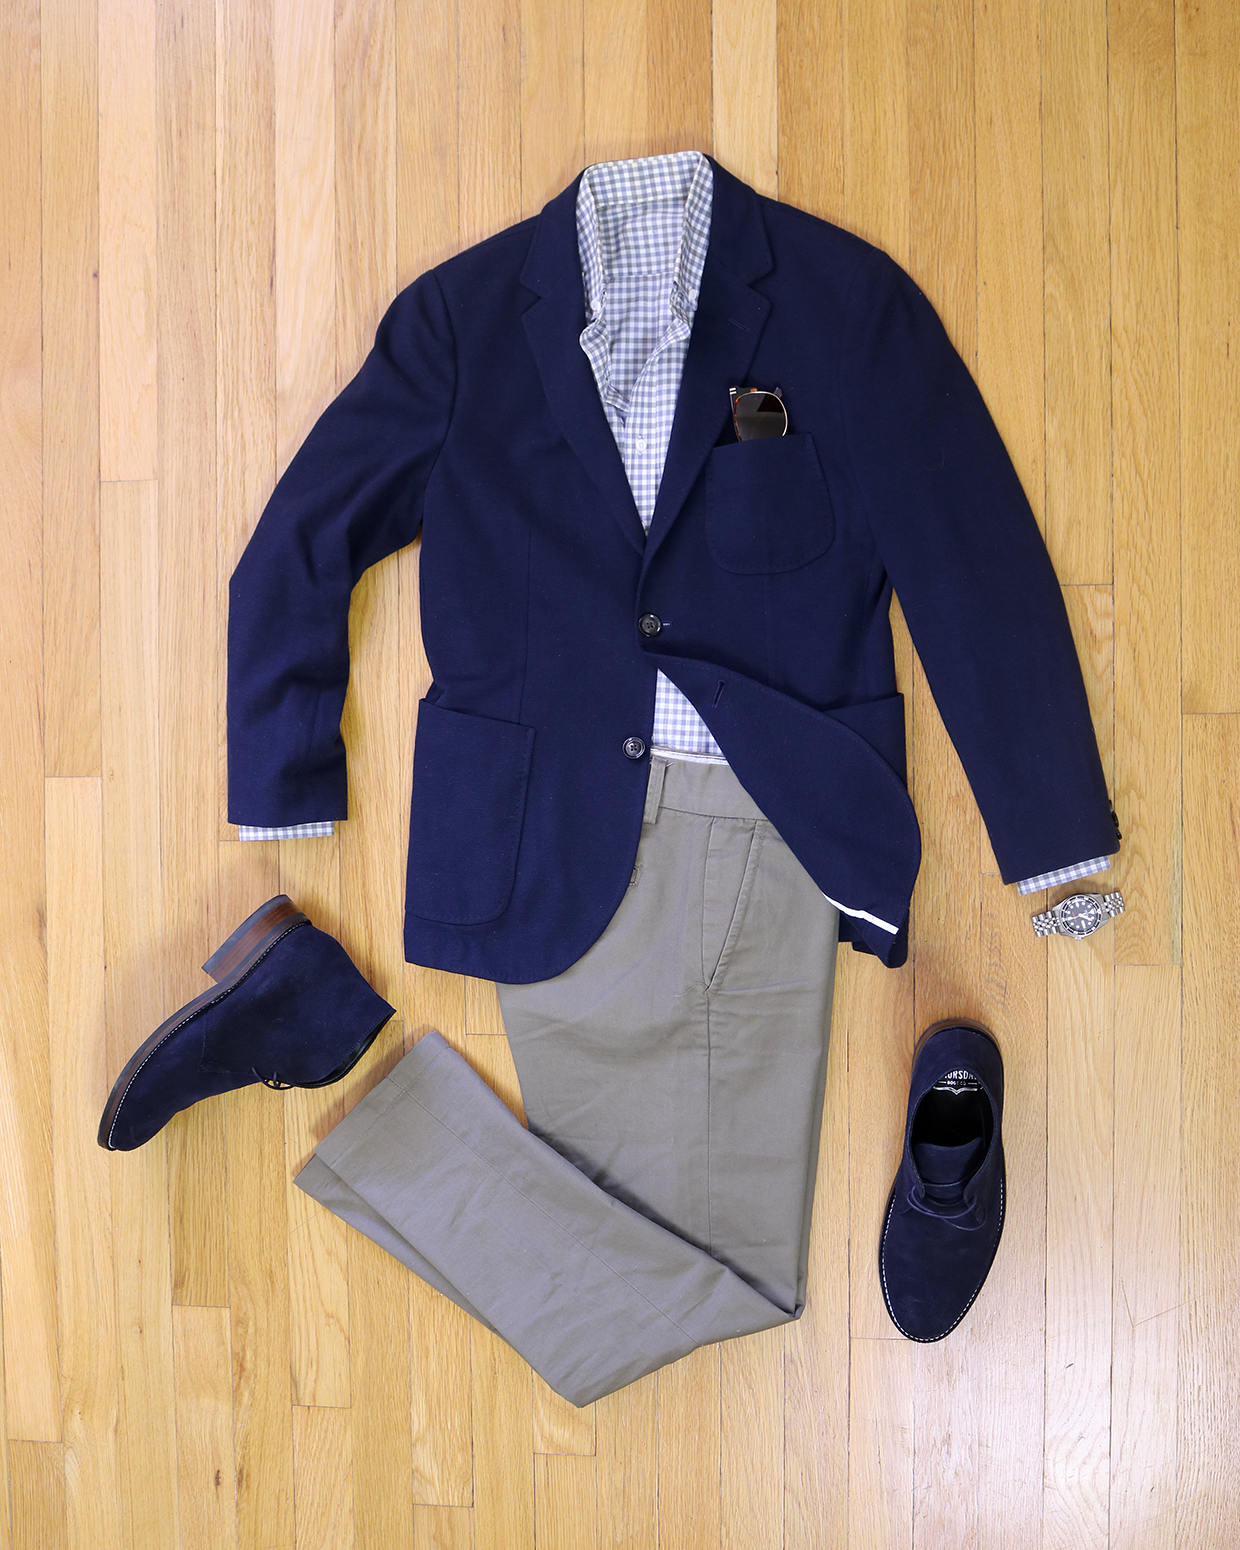 Blue Chukka Boots Outfit Flash Sales, 60% OFF 